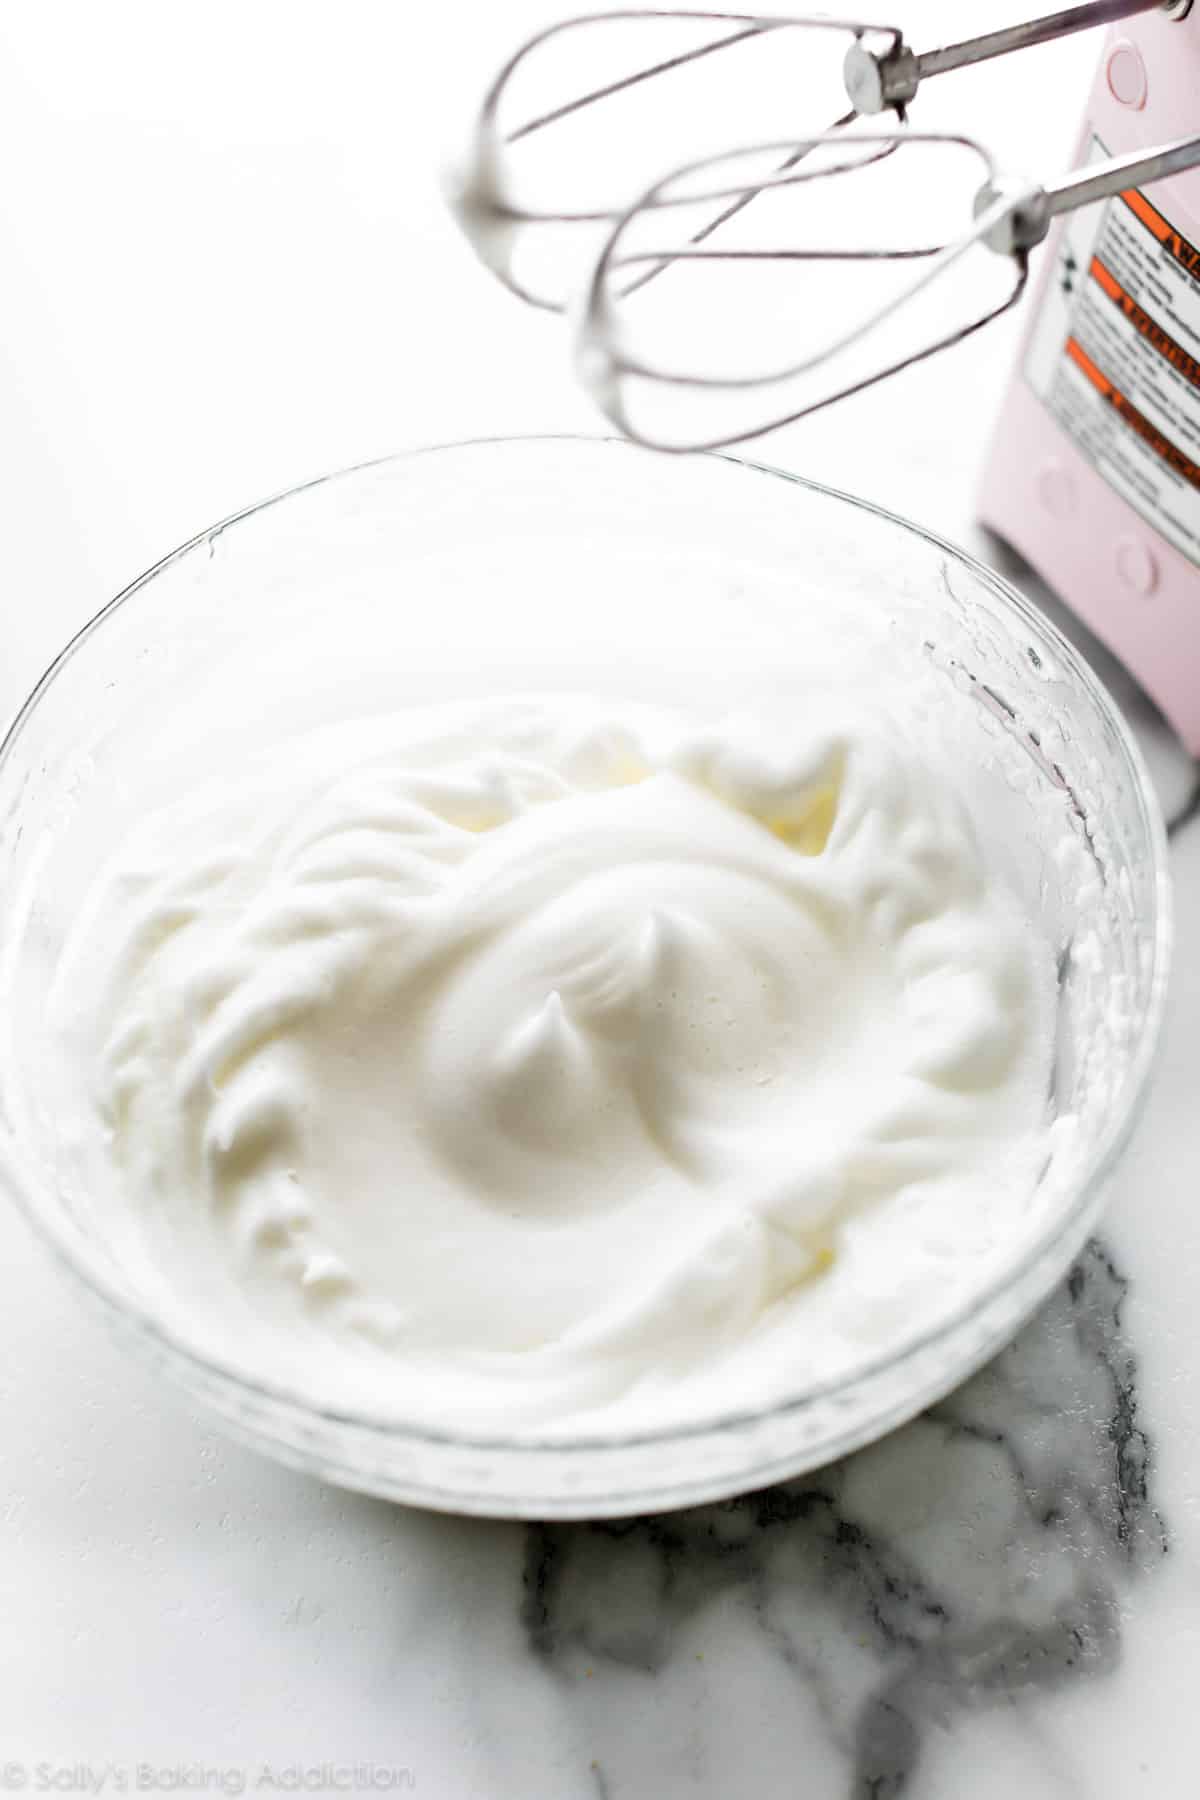 Whipped egg whites in a glass bowl